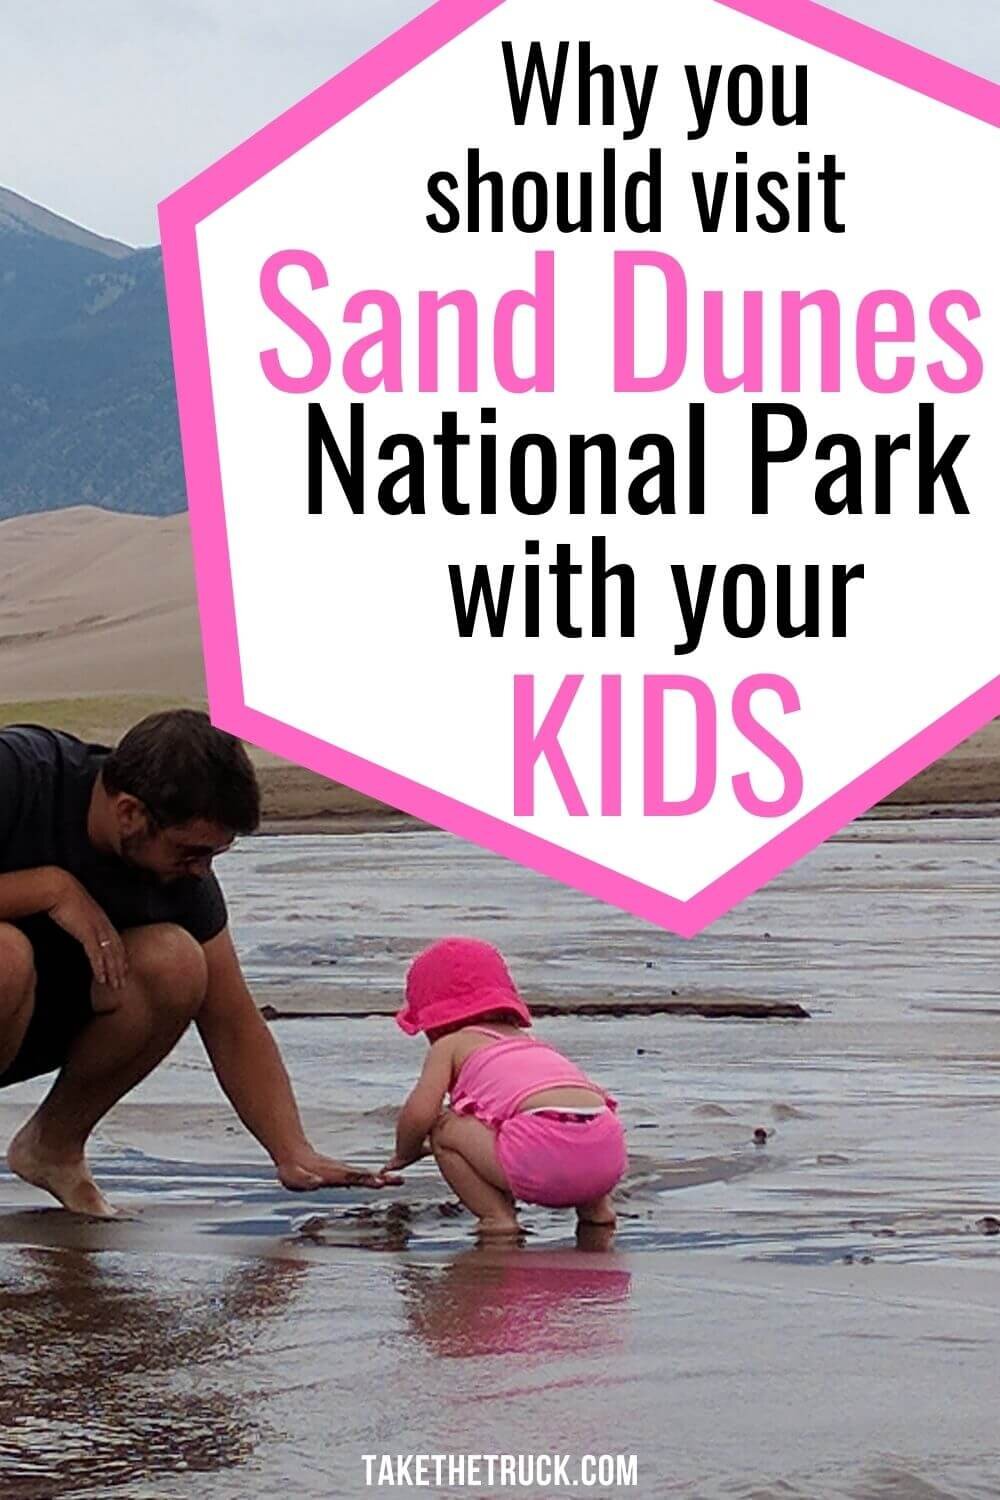 Visiting Great Sand Dunes National Park with kids is a great family vacation in Colorado! Check out this post to see why Sand Dunes National Park should be on your bucket list with kids.